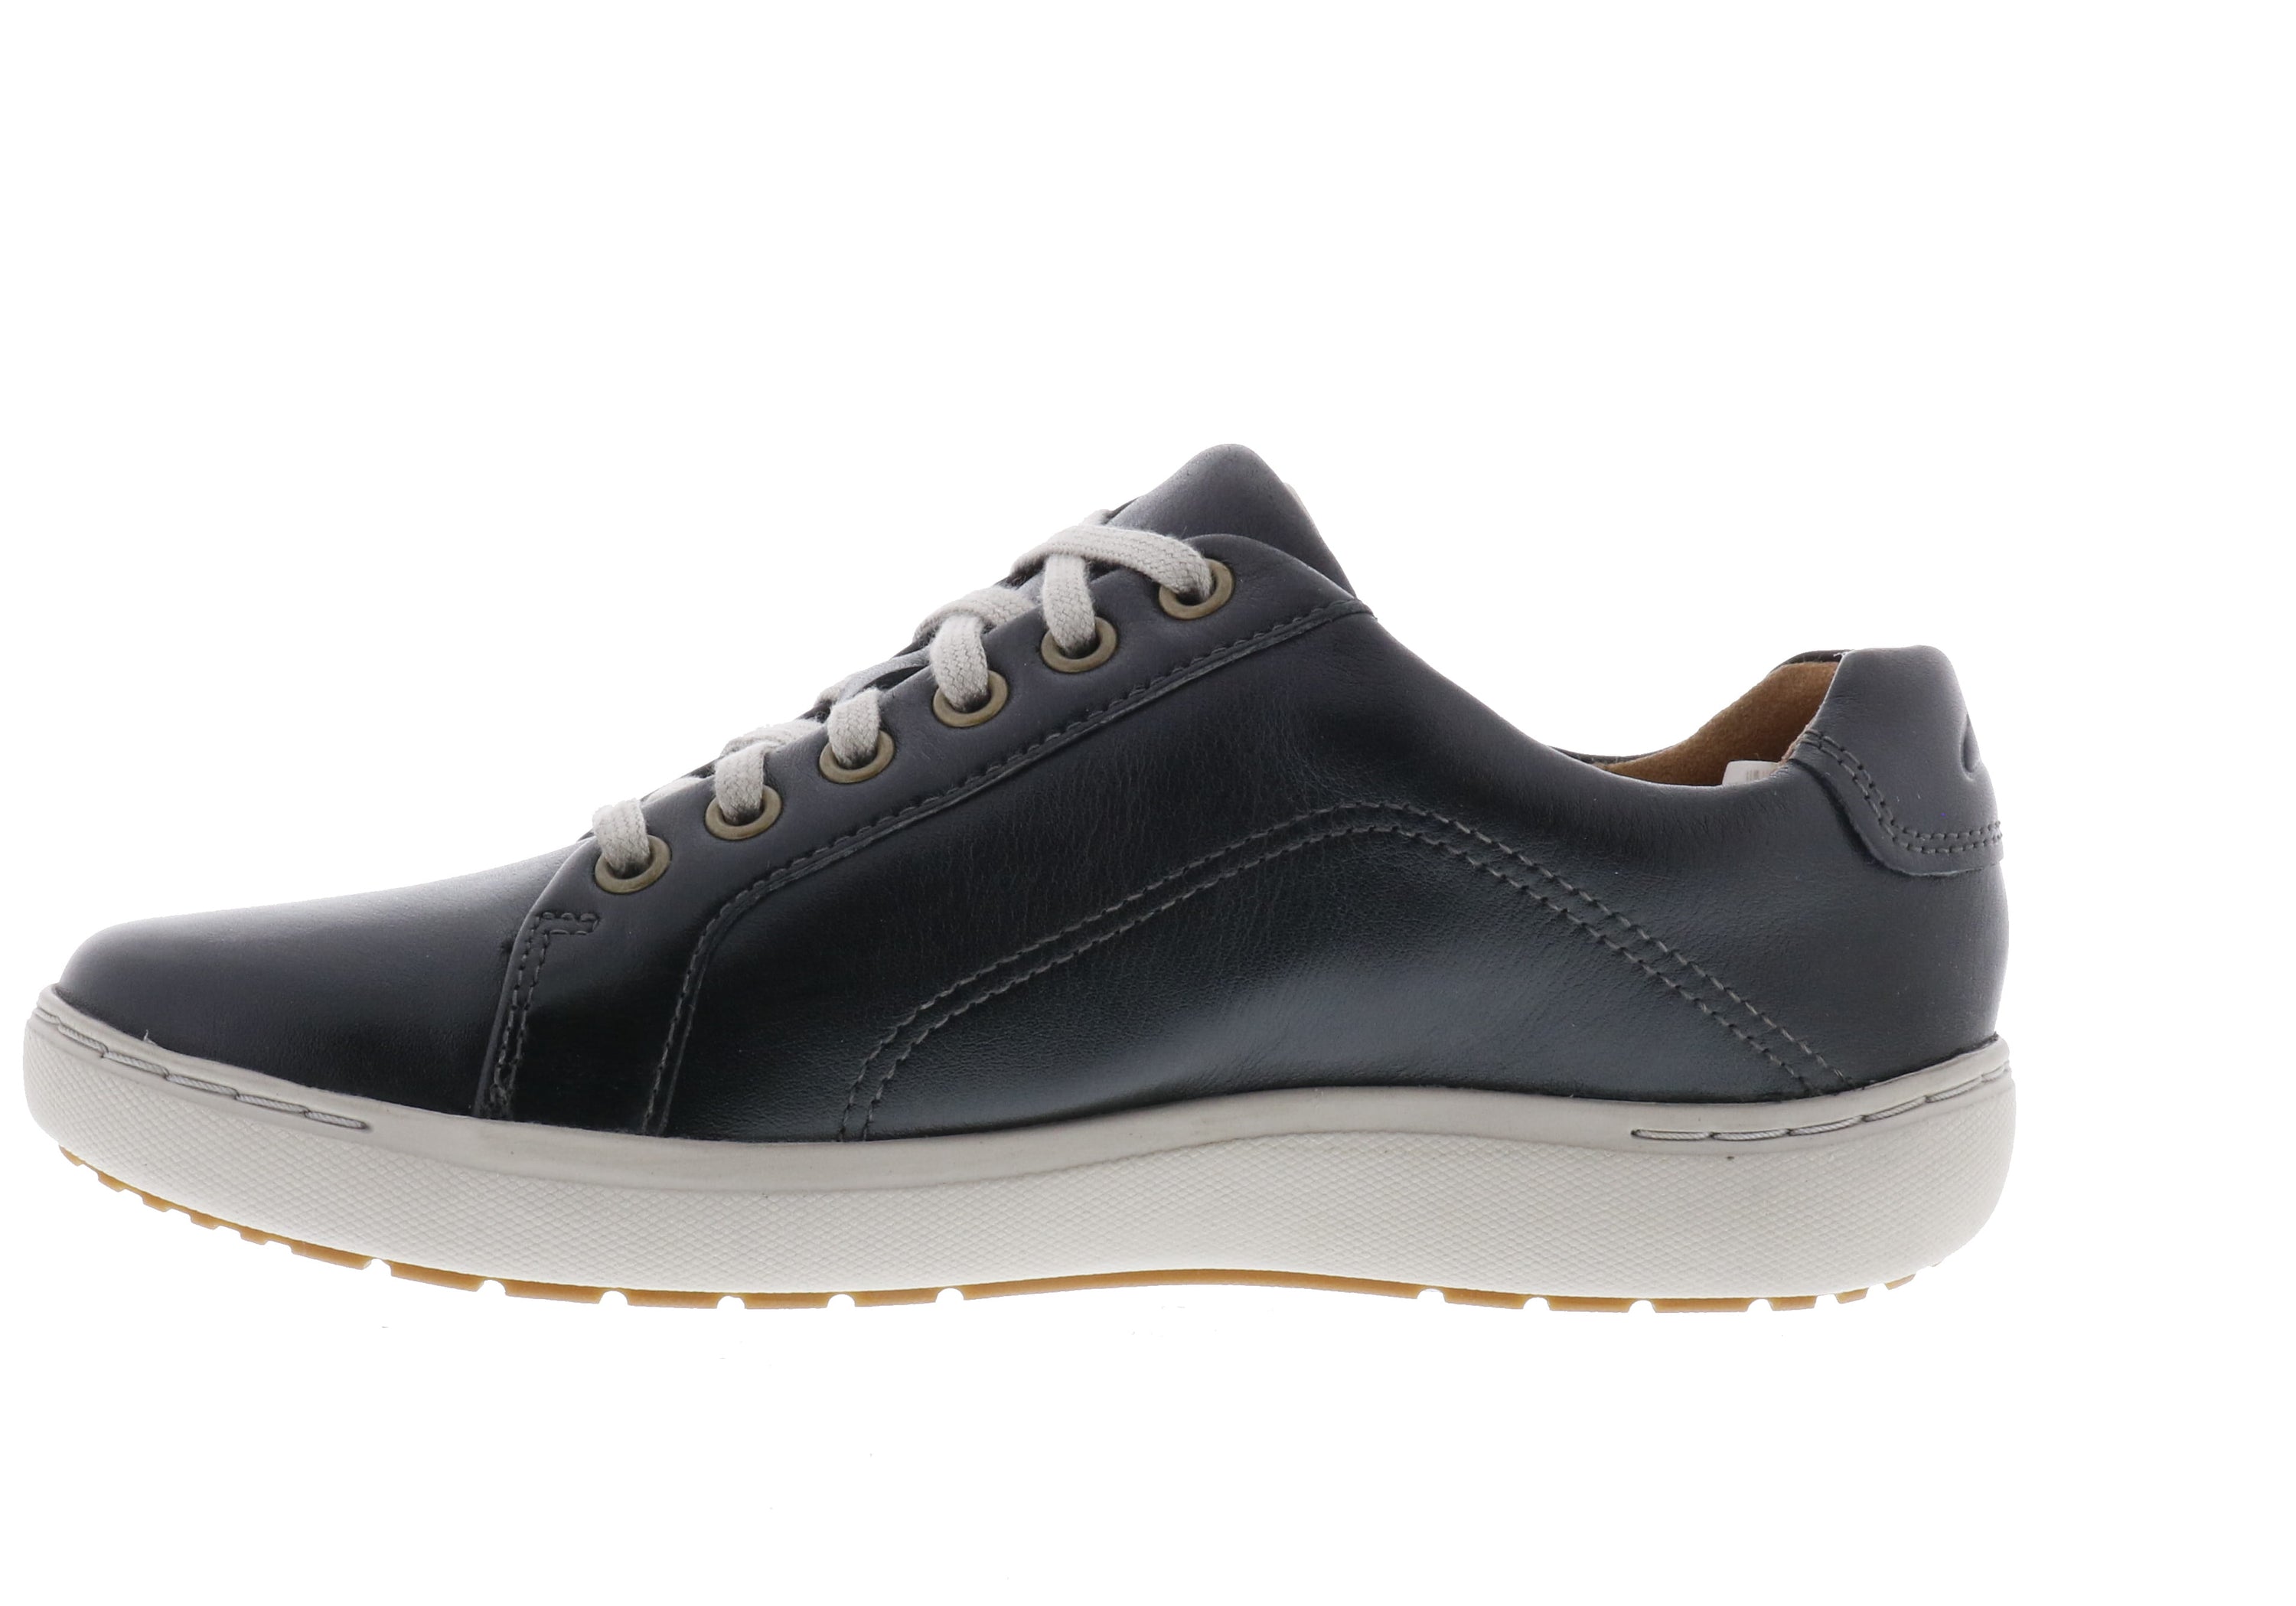 Clarks Nalle Lace (Women's) - Black Leather